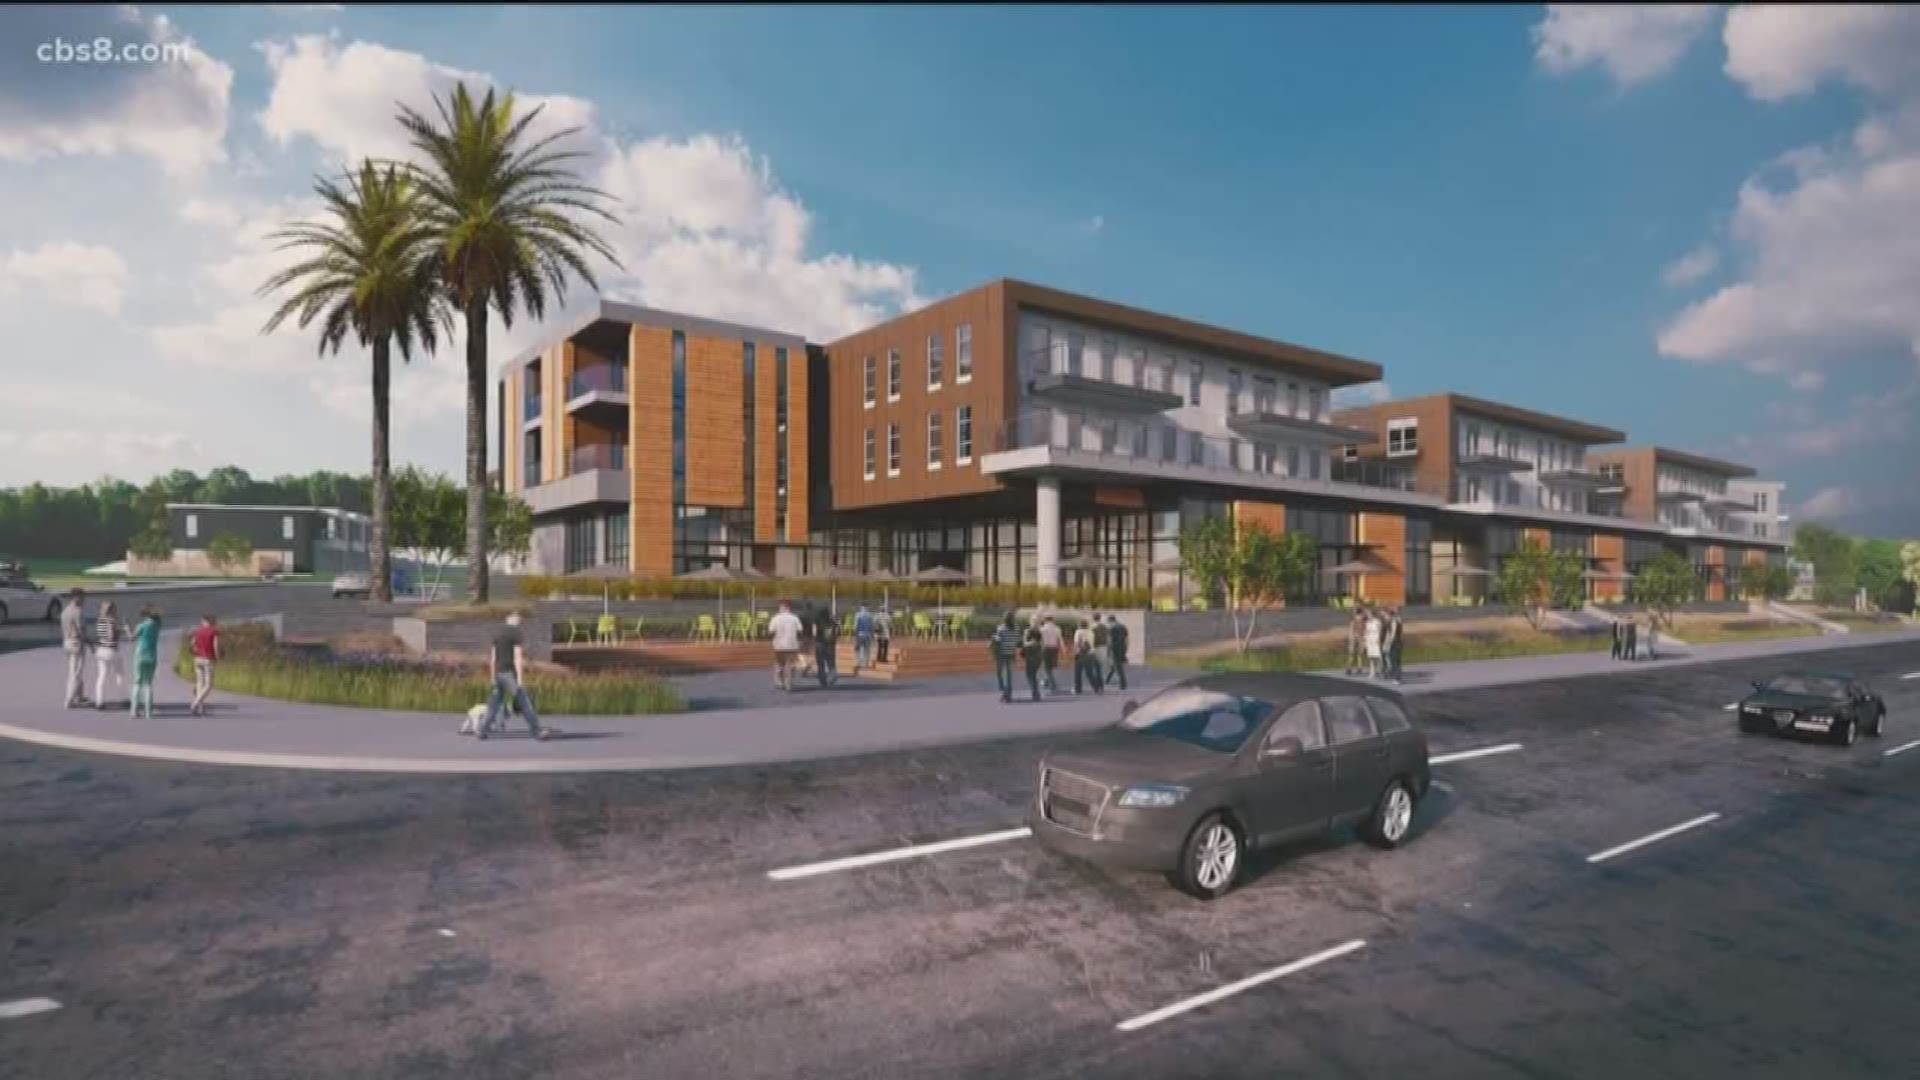 Rents have been on the rise across San Diego, but a new apartment complex in Pacific Beach is setting the bar even higher. While rents in San Diego are averaging more than $2,200 a month, the going rate for some units at the Jefferson Luxury complex in Pacific Beach will be $6,000 a month.